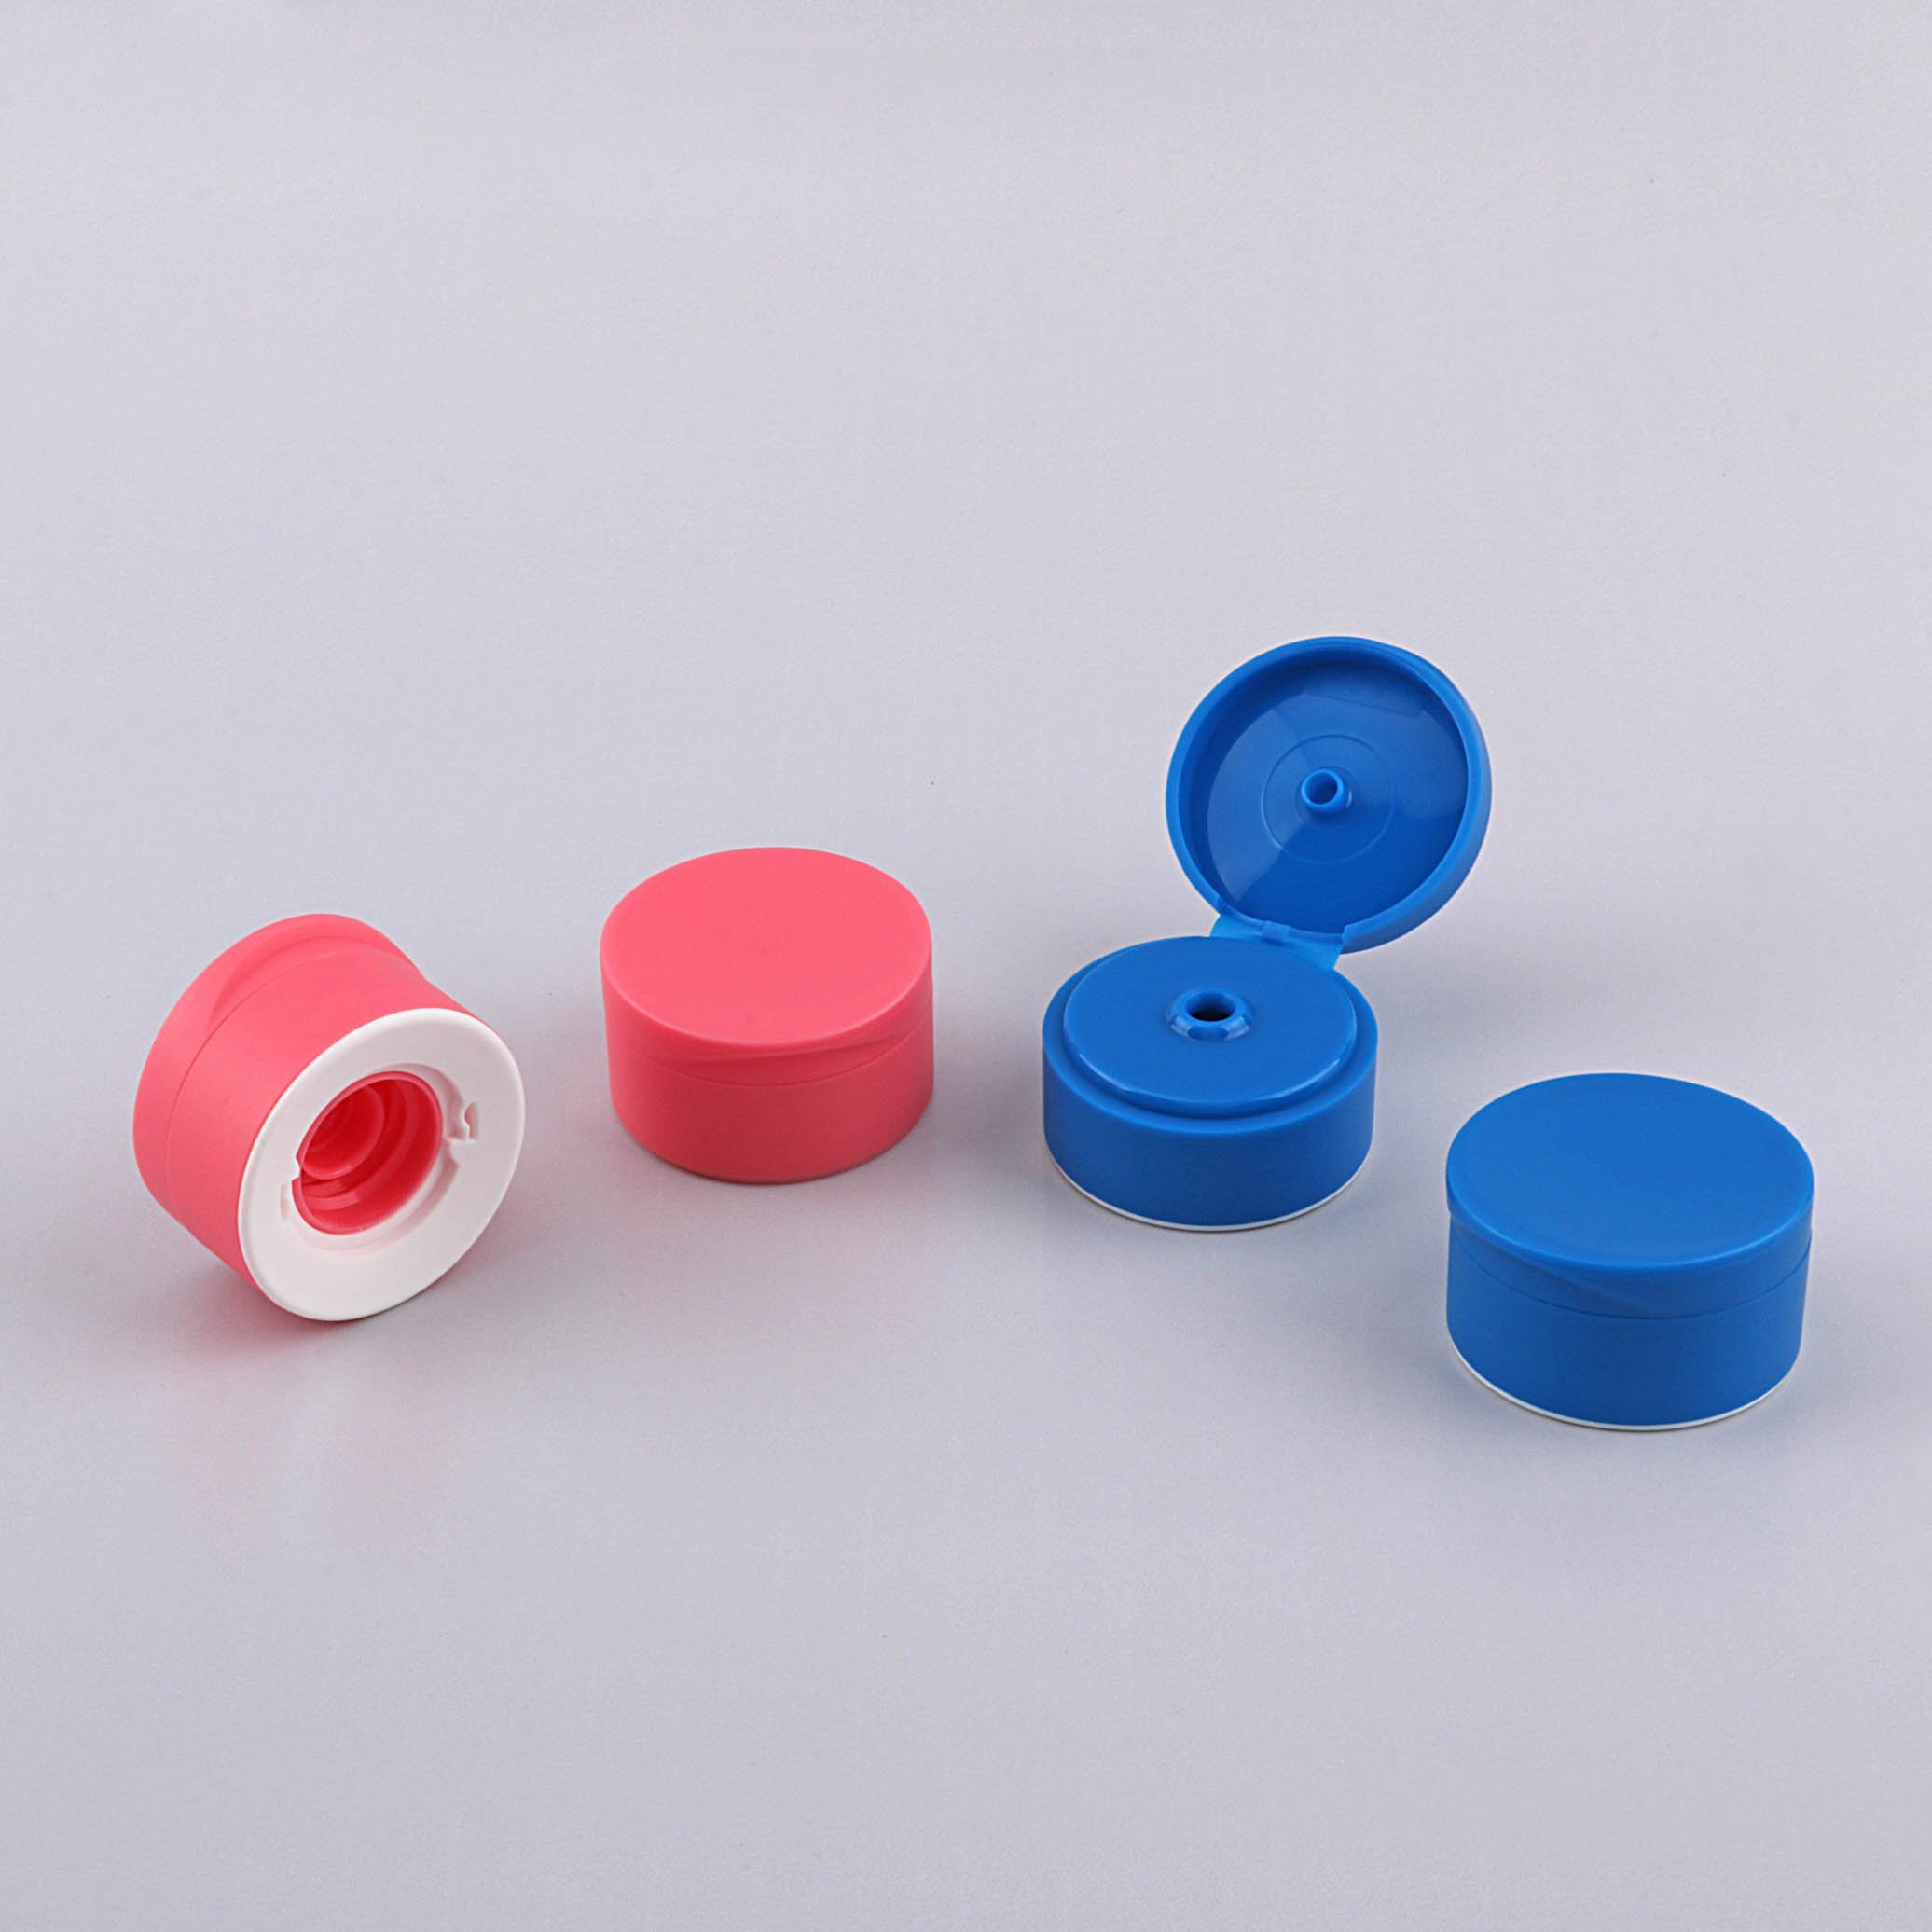 40mm_Diameter_Customized_Cleanser_Tubes_with_Matt_Two-Color_Flip_Top_Caps4